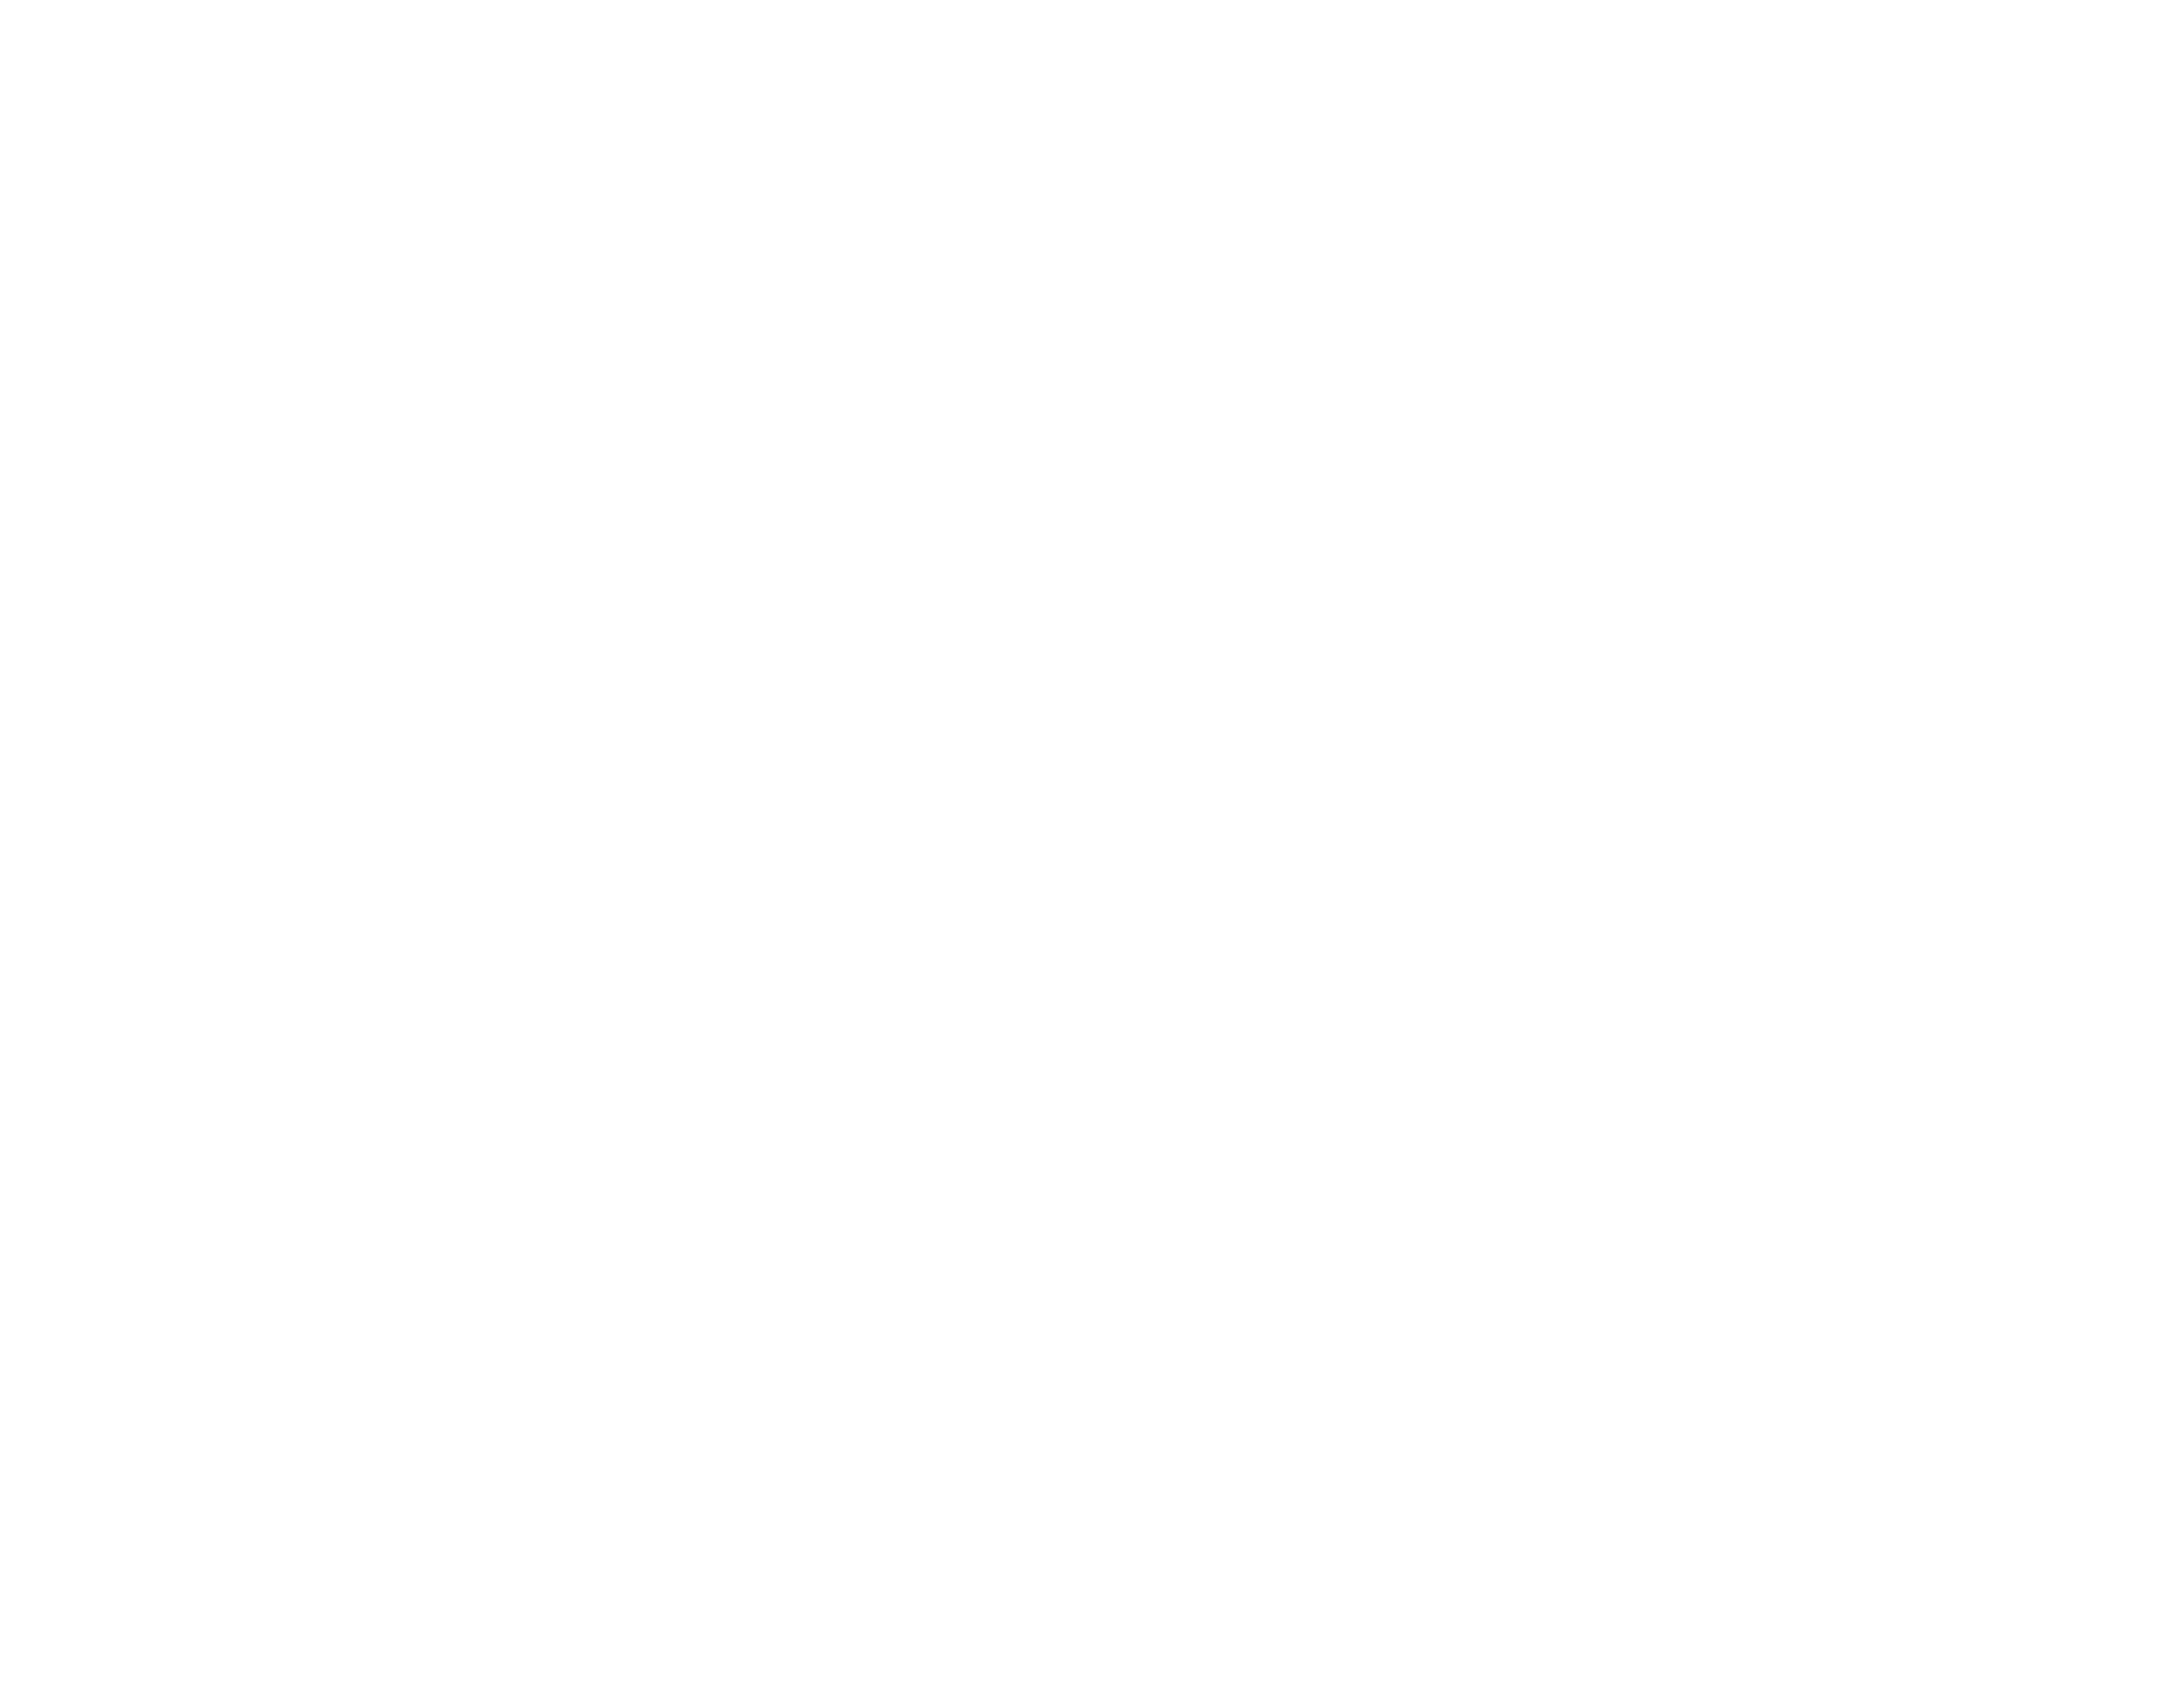 NYT-W.png